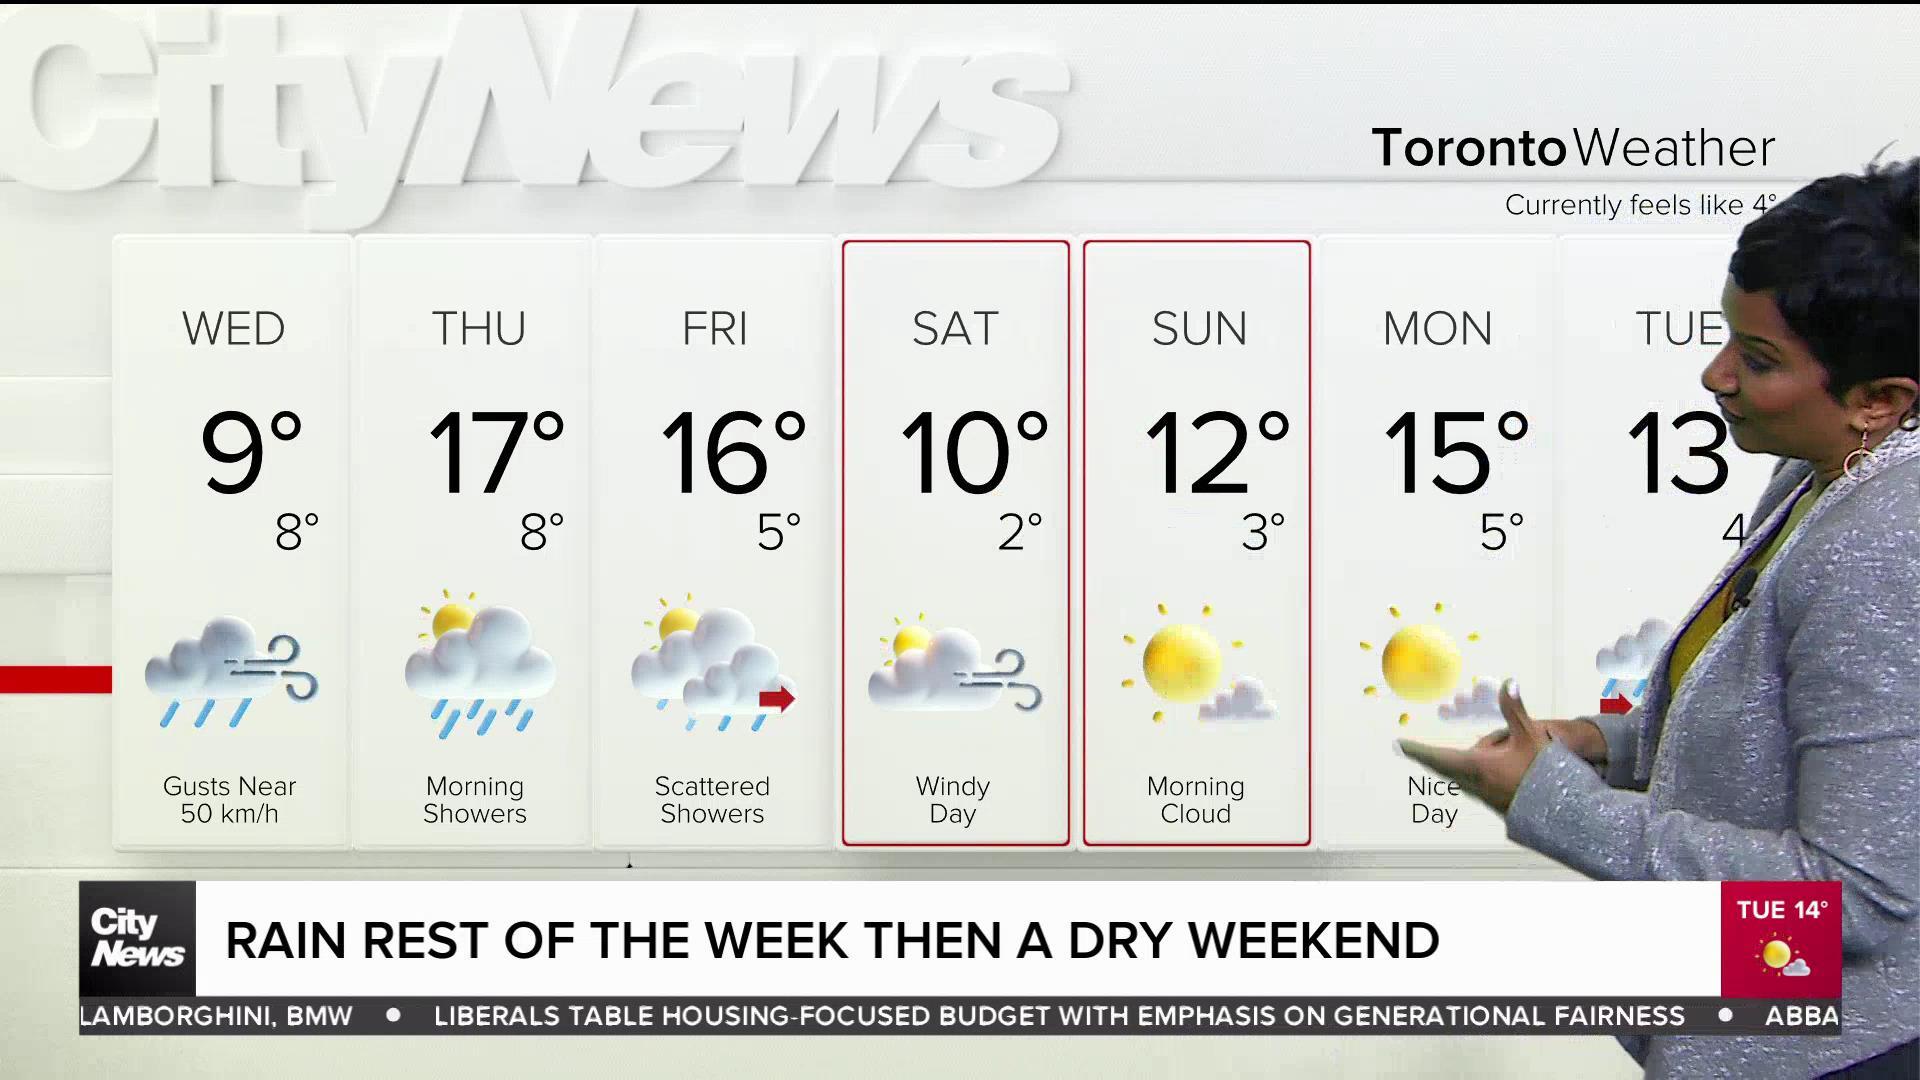 Rain for the rest of the week, dry weekend for the GTA